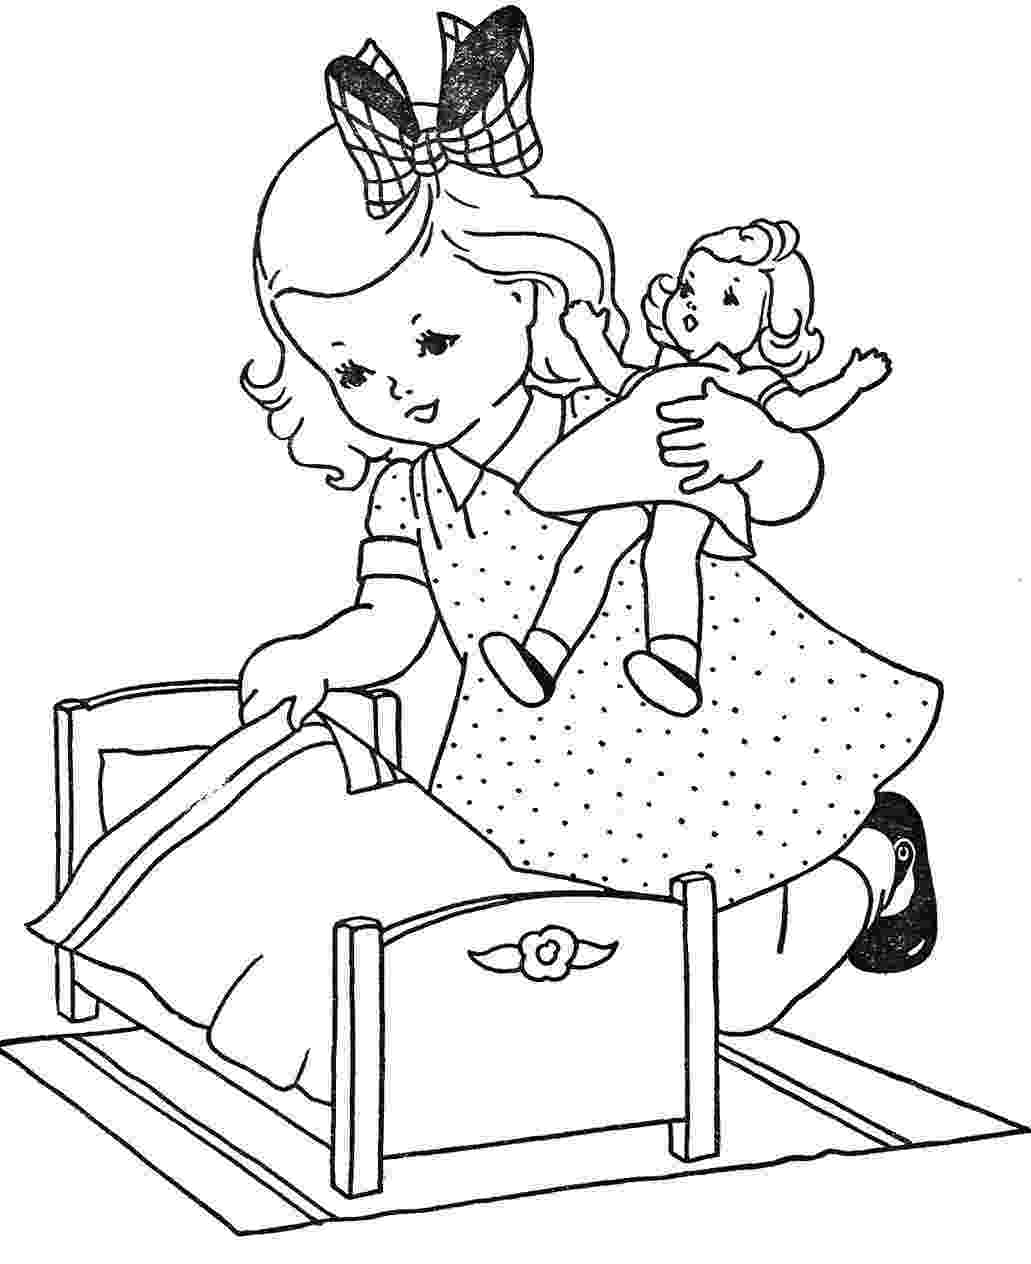 free colouring pages for girls coloring pages for girls best coloring pages for kids for girls colouring free pages 